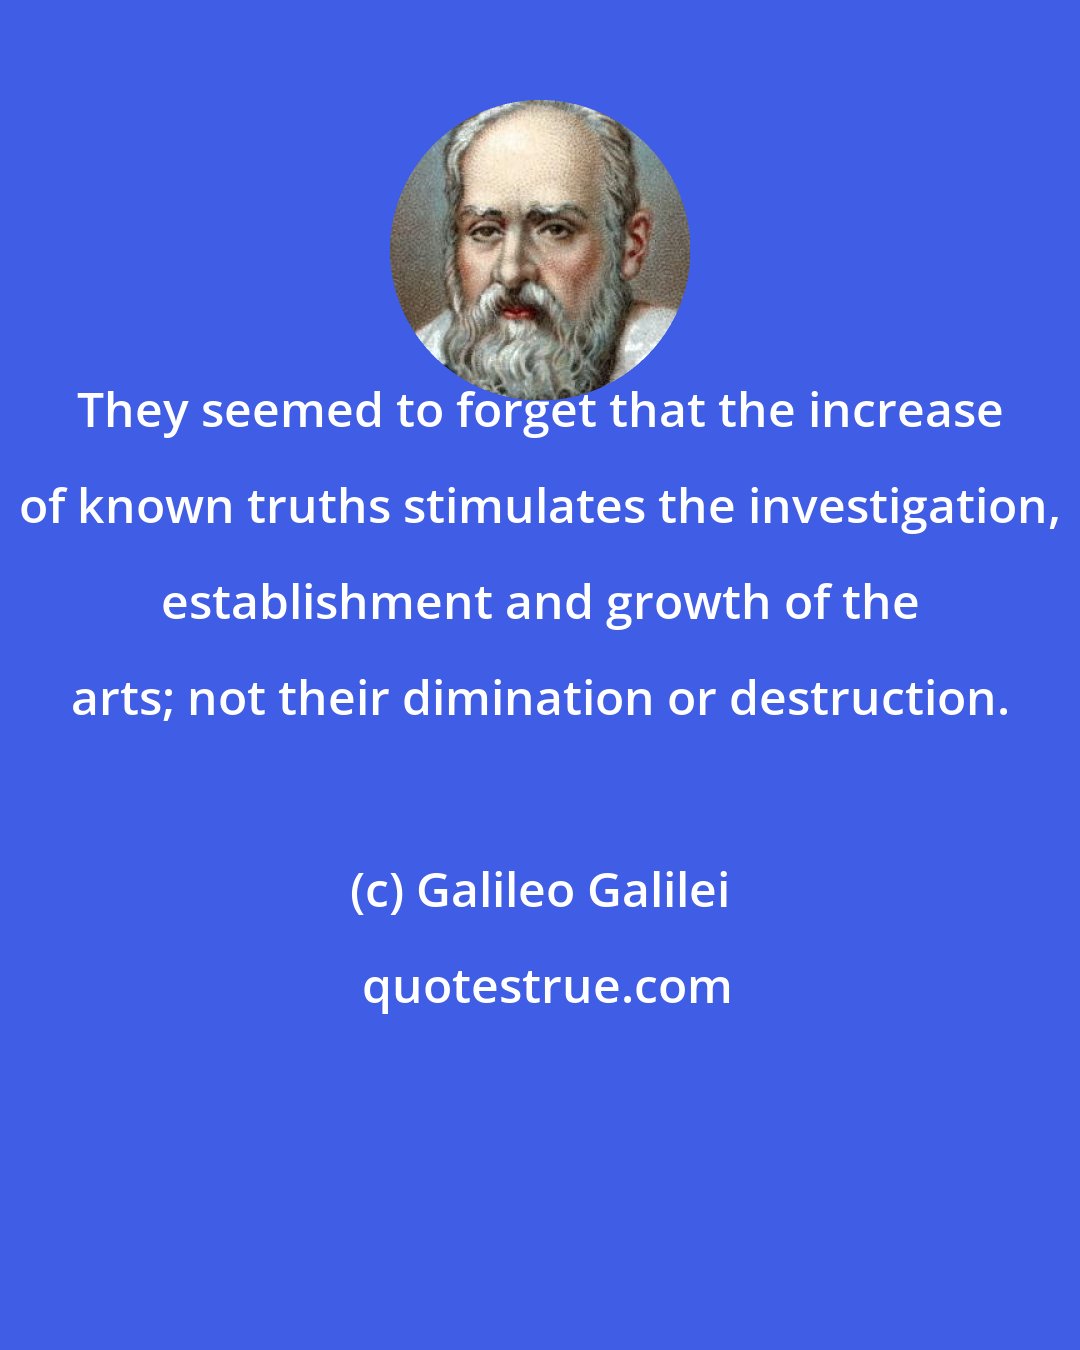 Galileo Galilei: They seemed to forget that the increase of known truths stimulates the investigation, establishment and growth of the arts; not their dimination or destruction.